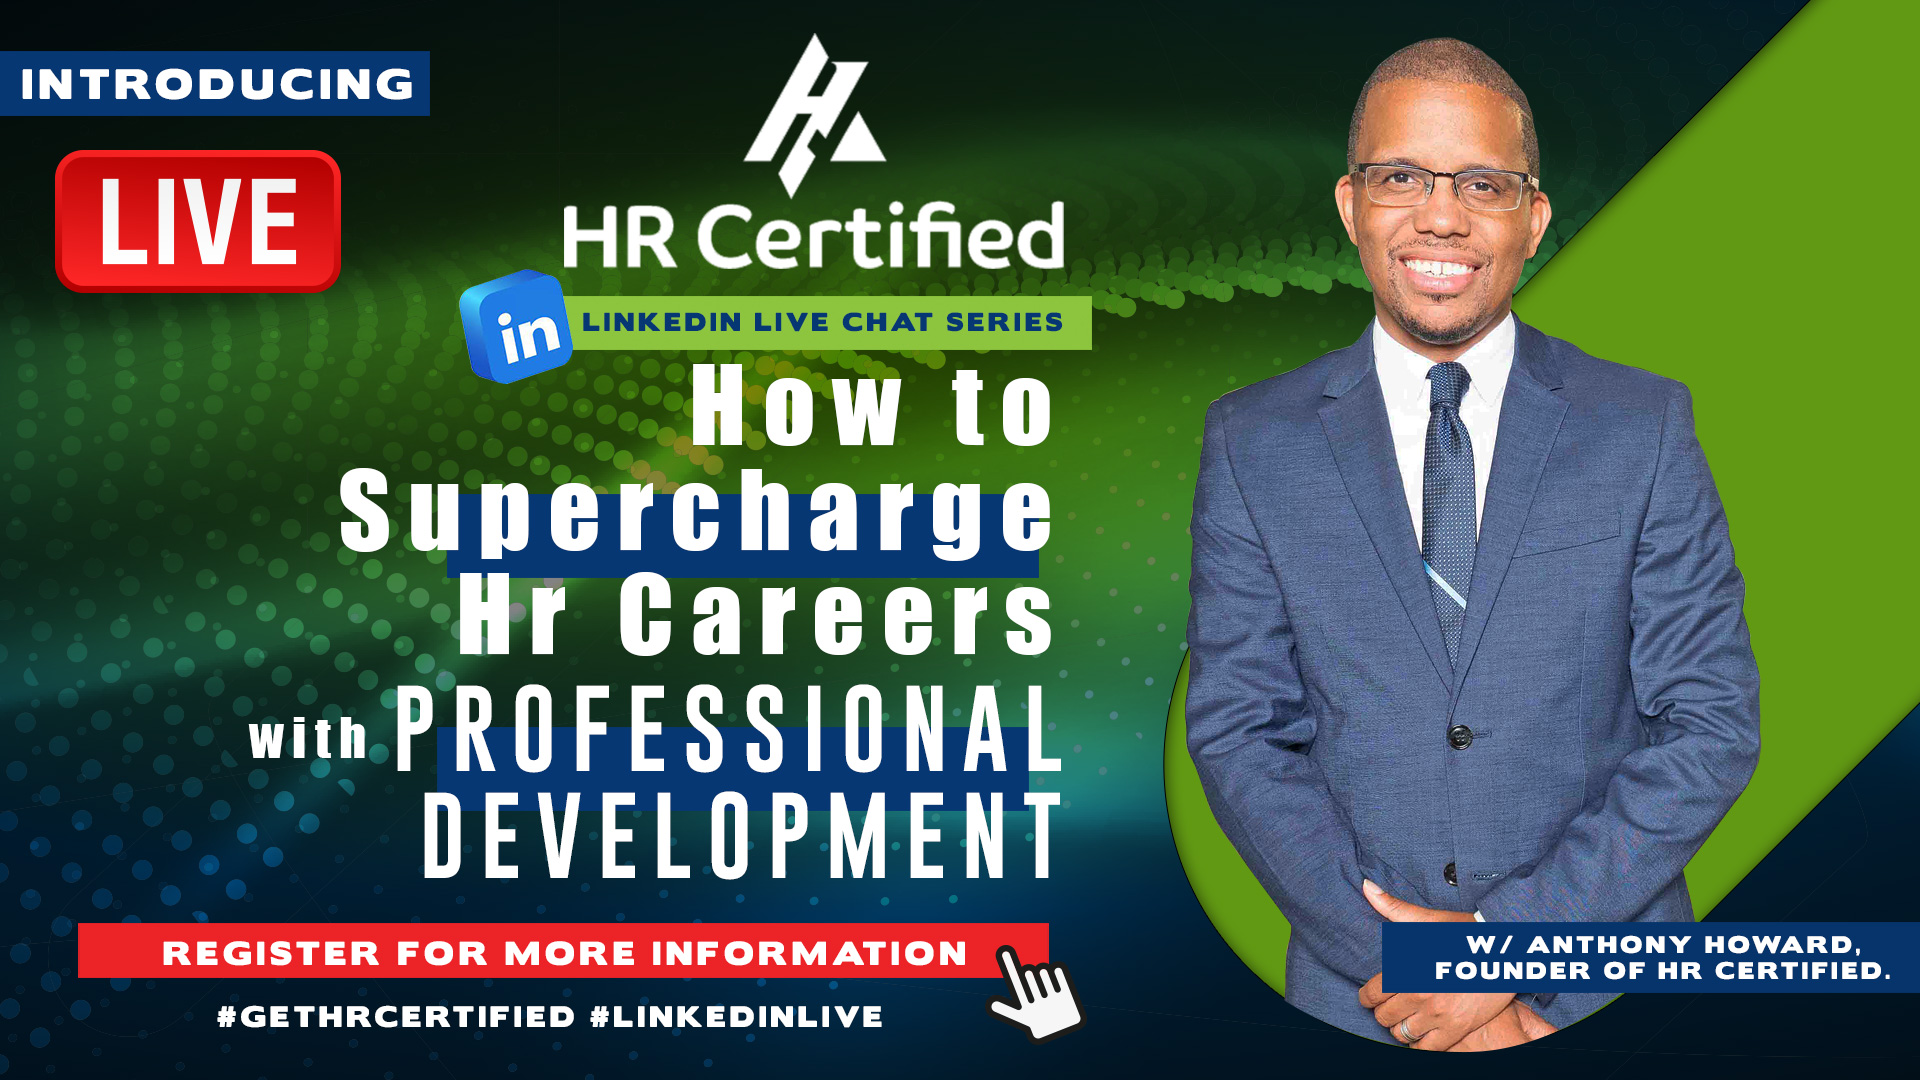 Join a Live Talk About Professional Development for HR Pros with HR Certified